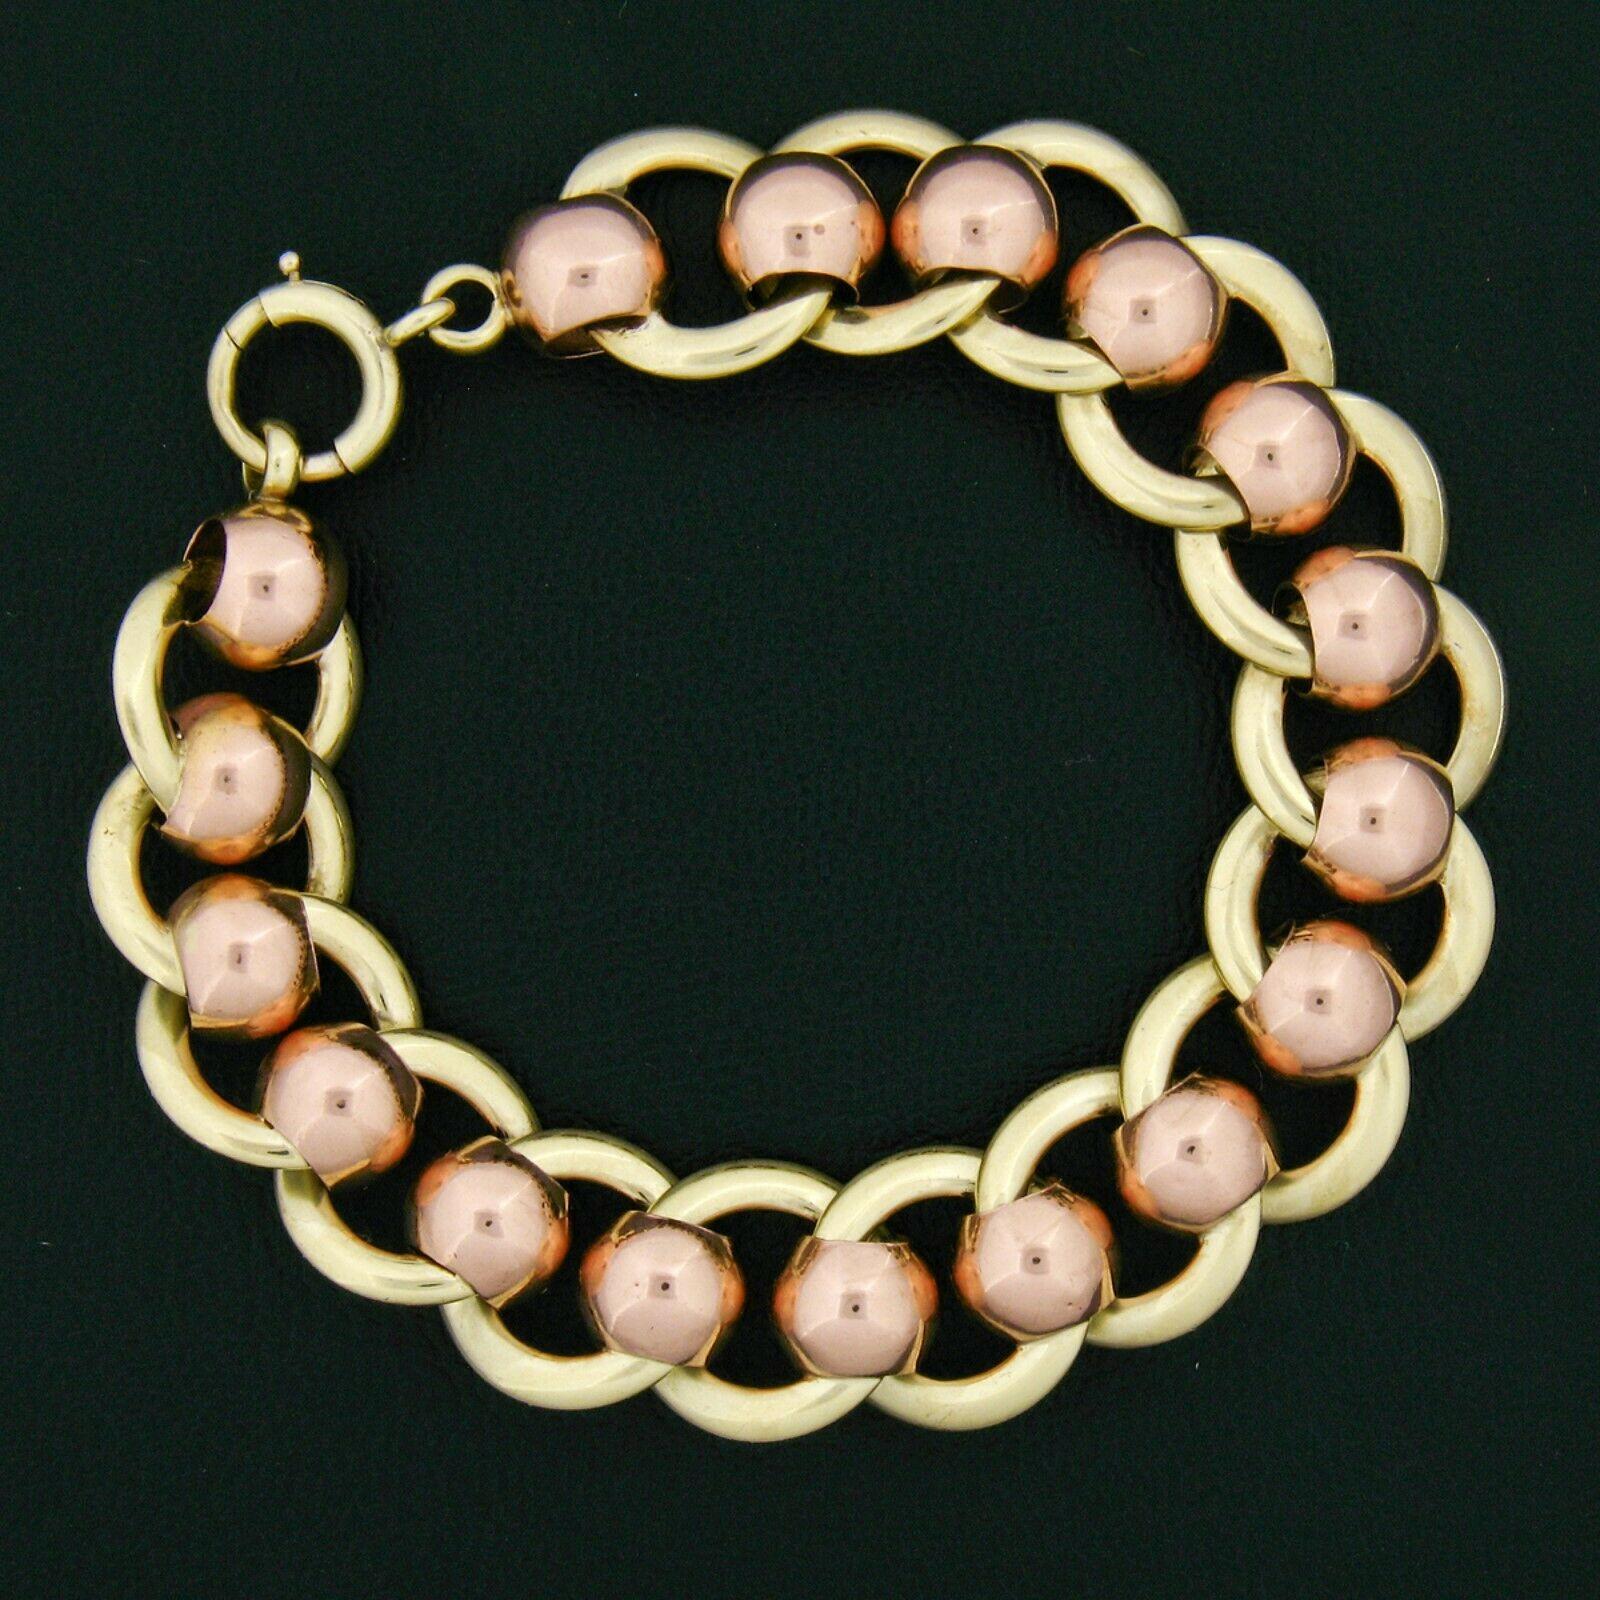 Here we have a vintage rolo and flat cable combination link chain bracelet. The chain is solid 14k rose and green gold with a large and sturdy spring ring clasp. The chain is approximately 7.25 inches long but, due to the nature of the chain's